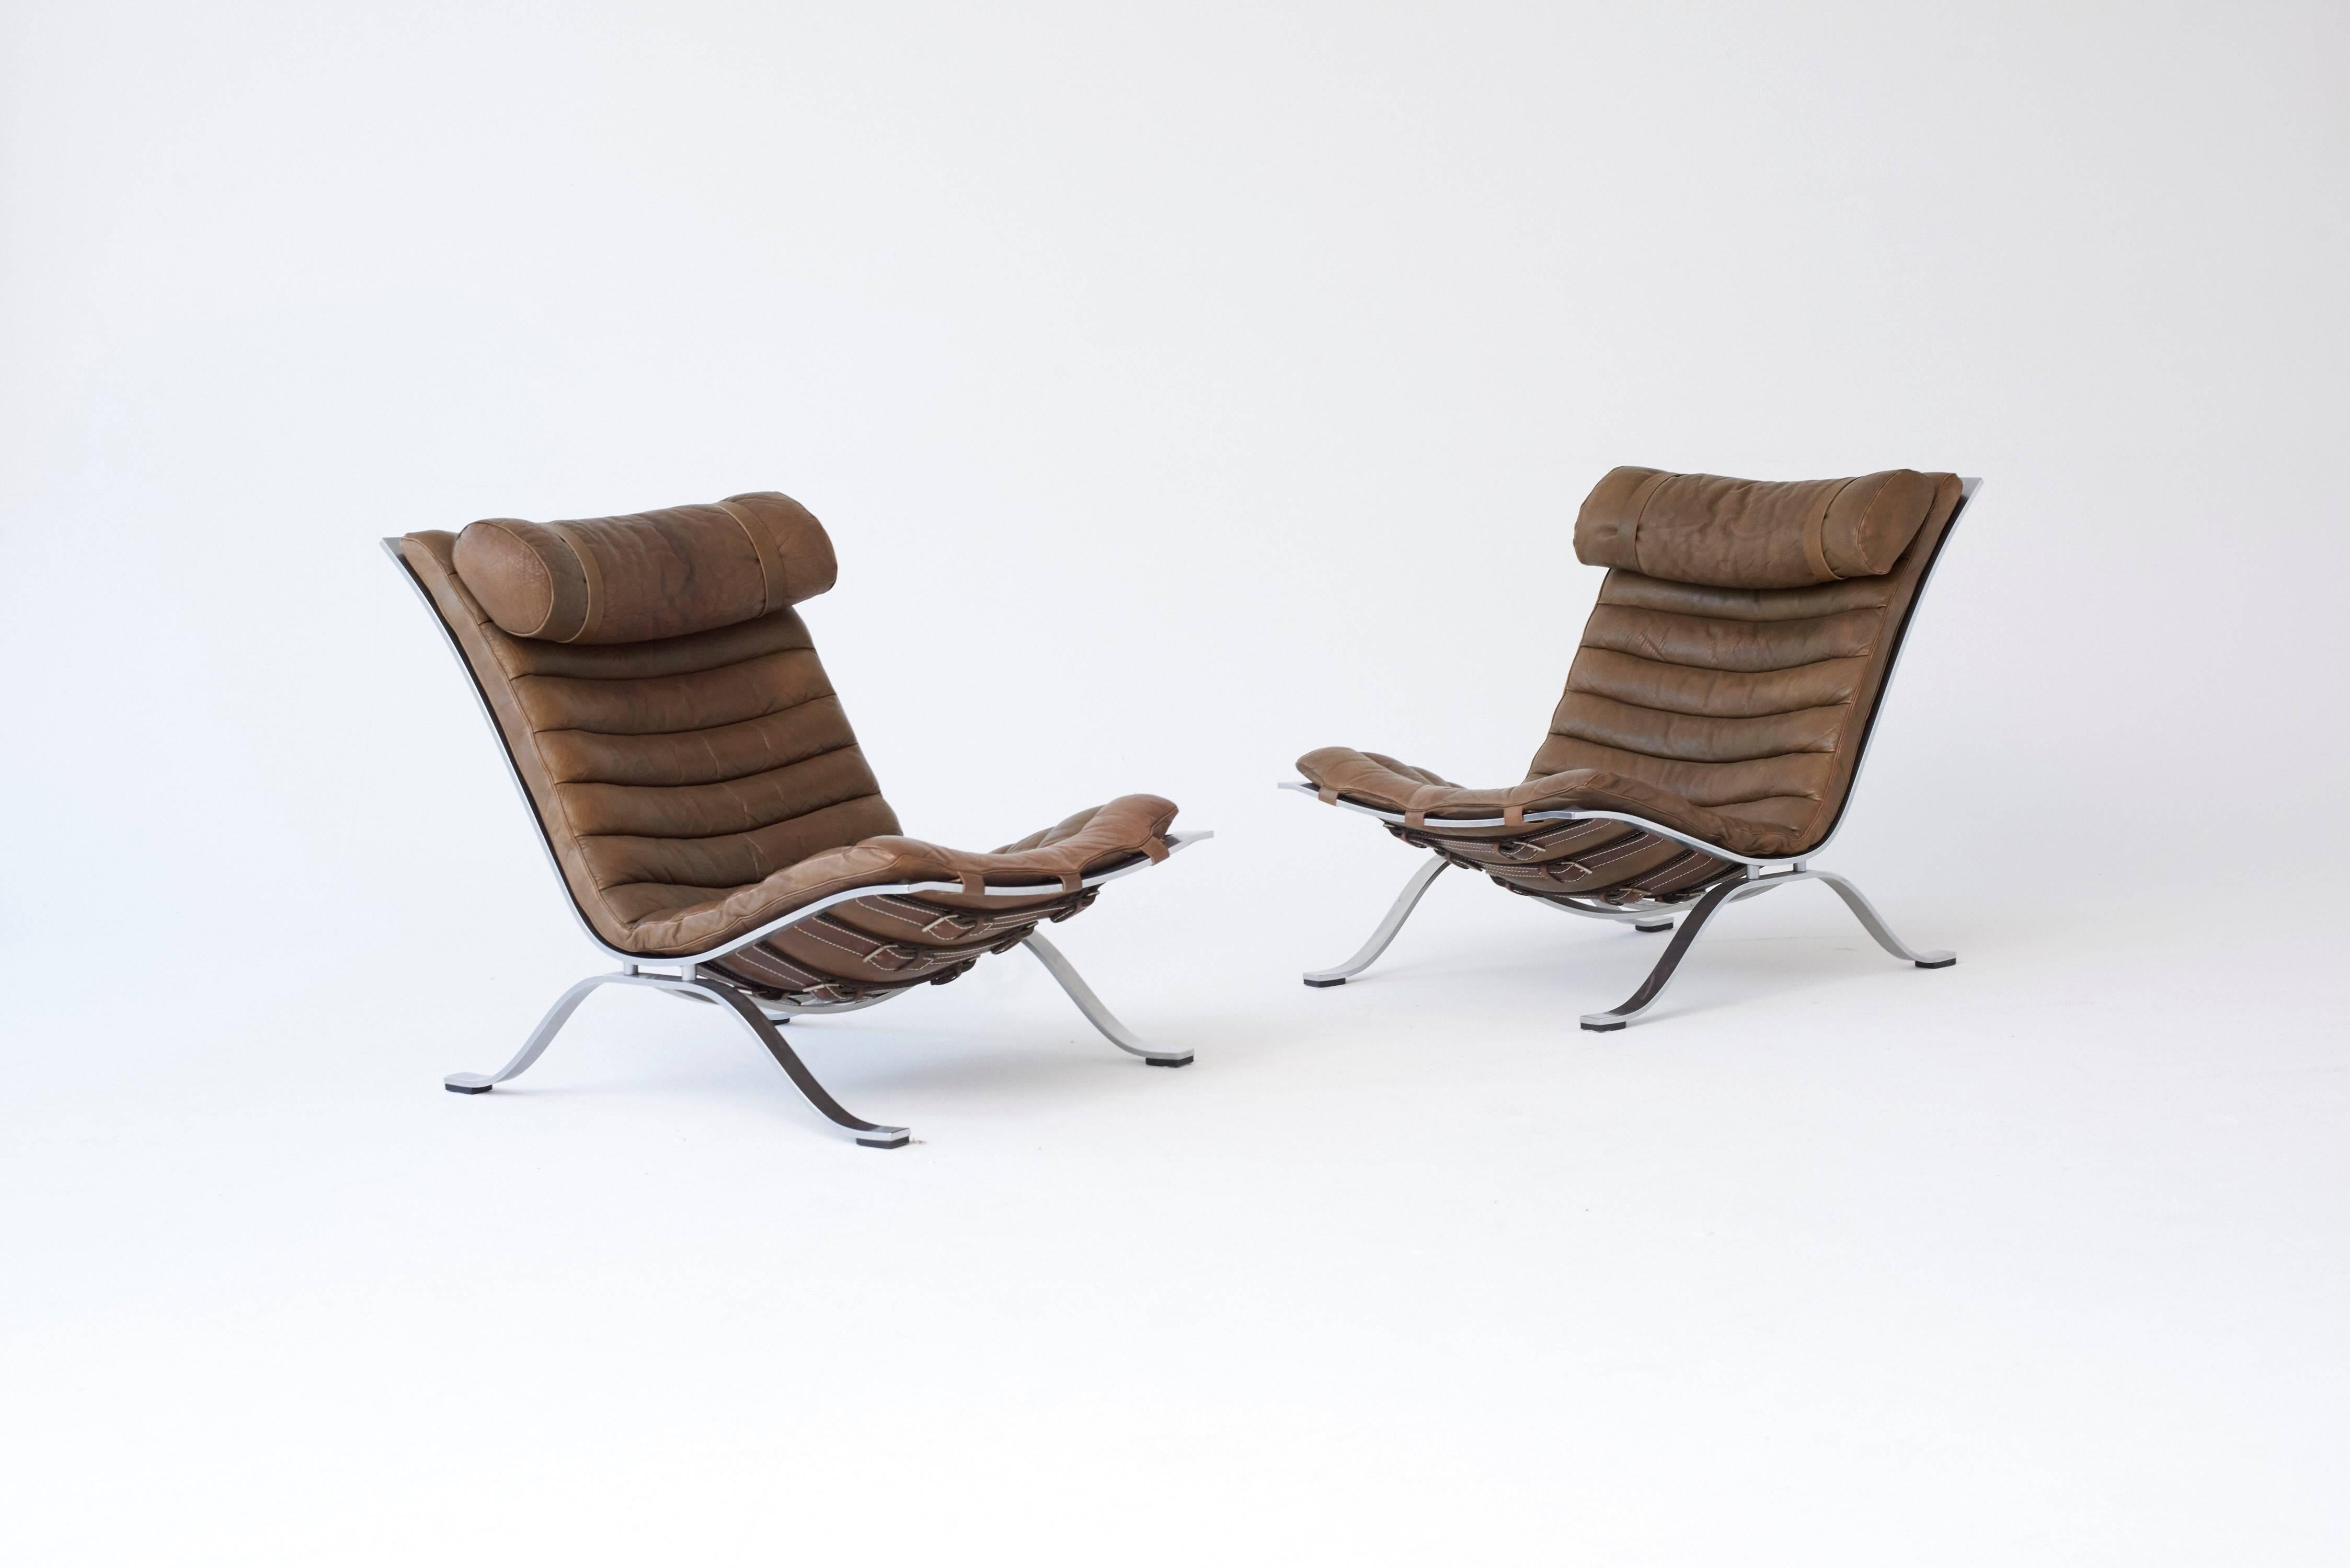 A stunning pair of Arne Norell Ari Chairs, Norell Mobler, Sweden, 1970s. Brown (with a hint of khaki) buffalo leather. Excellent original condition.